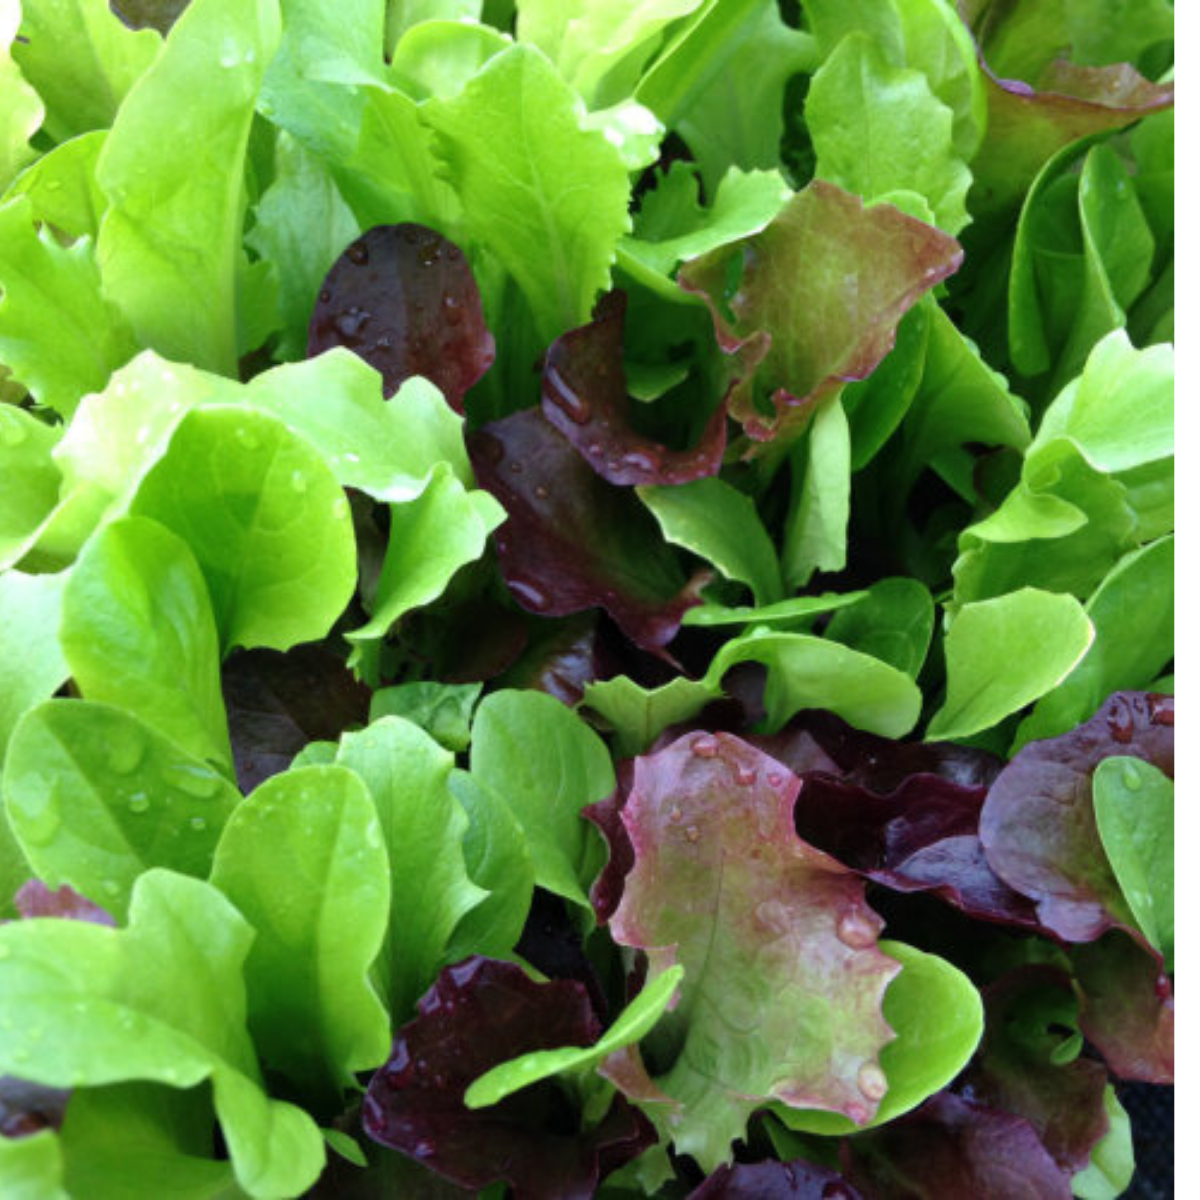 Mixed lettuce seeds